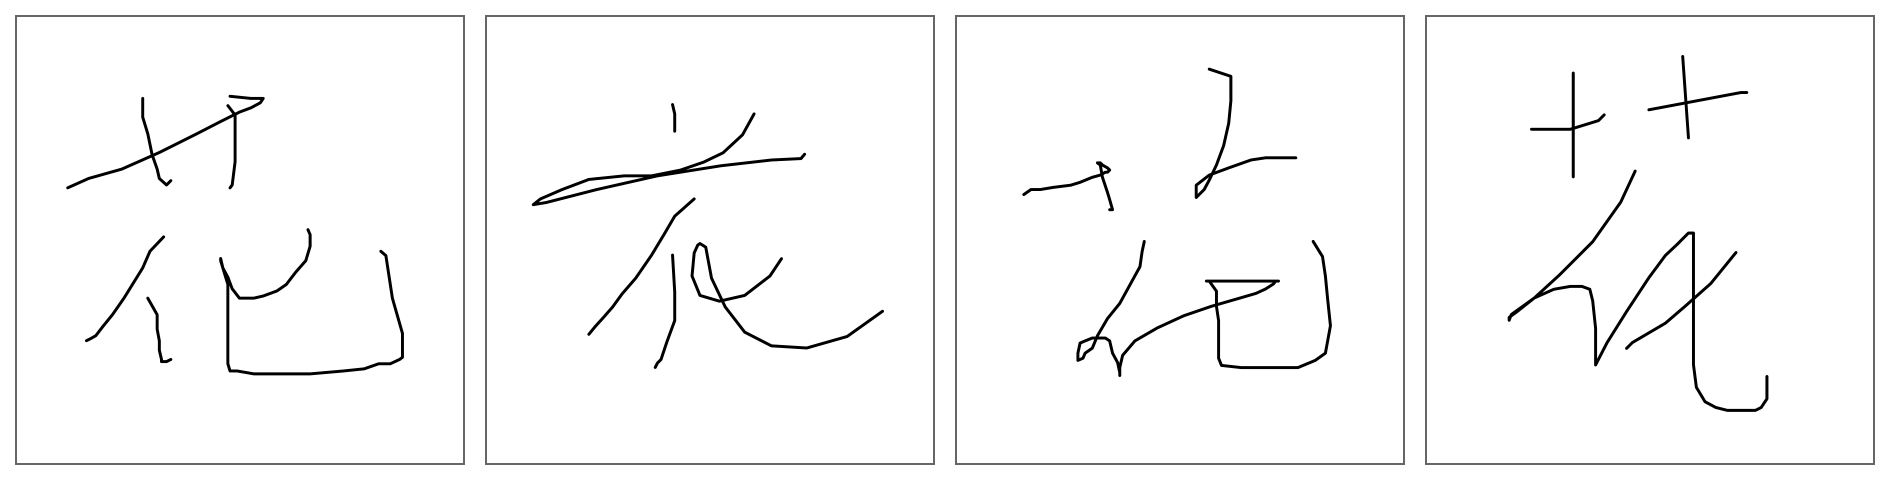 This figure shows four variations of the flower character in a cursive style.